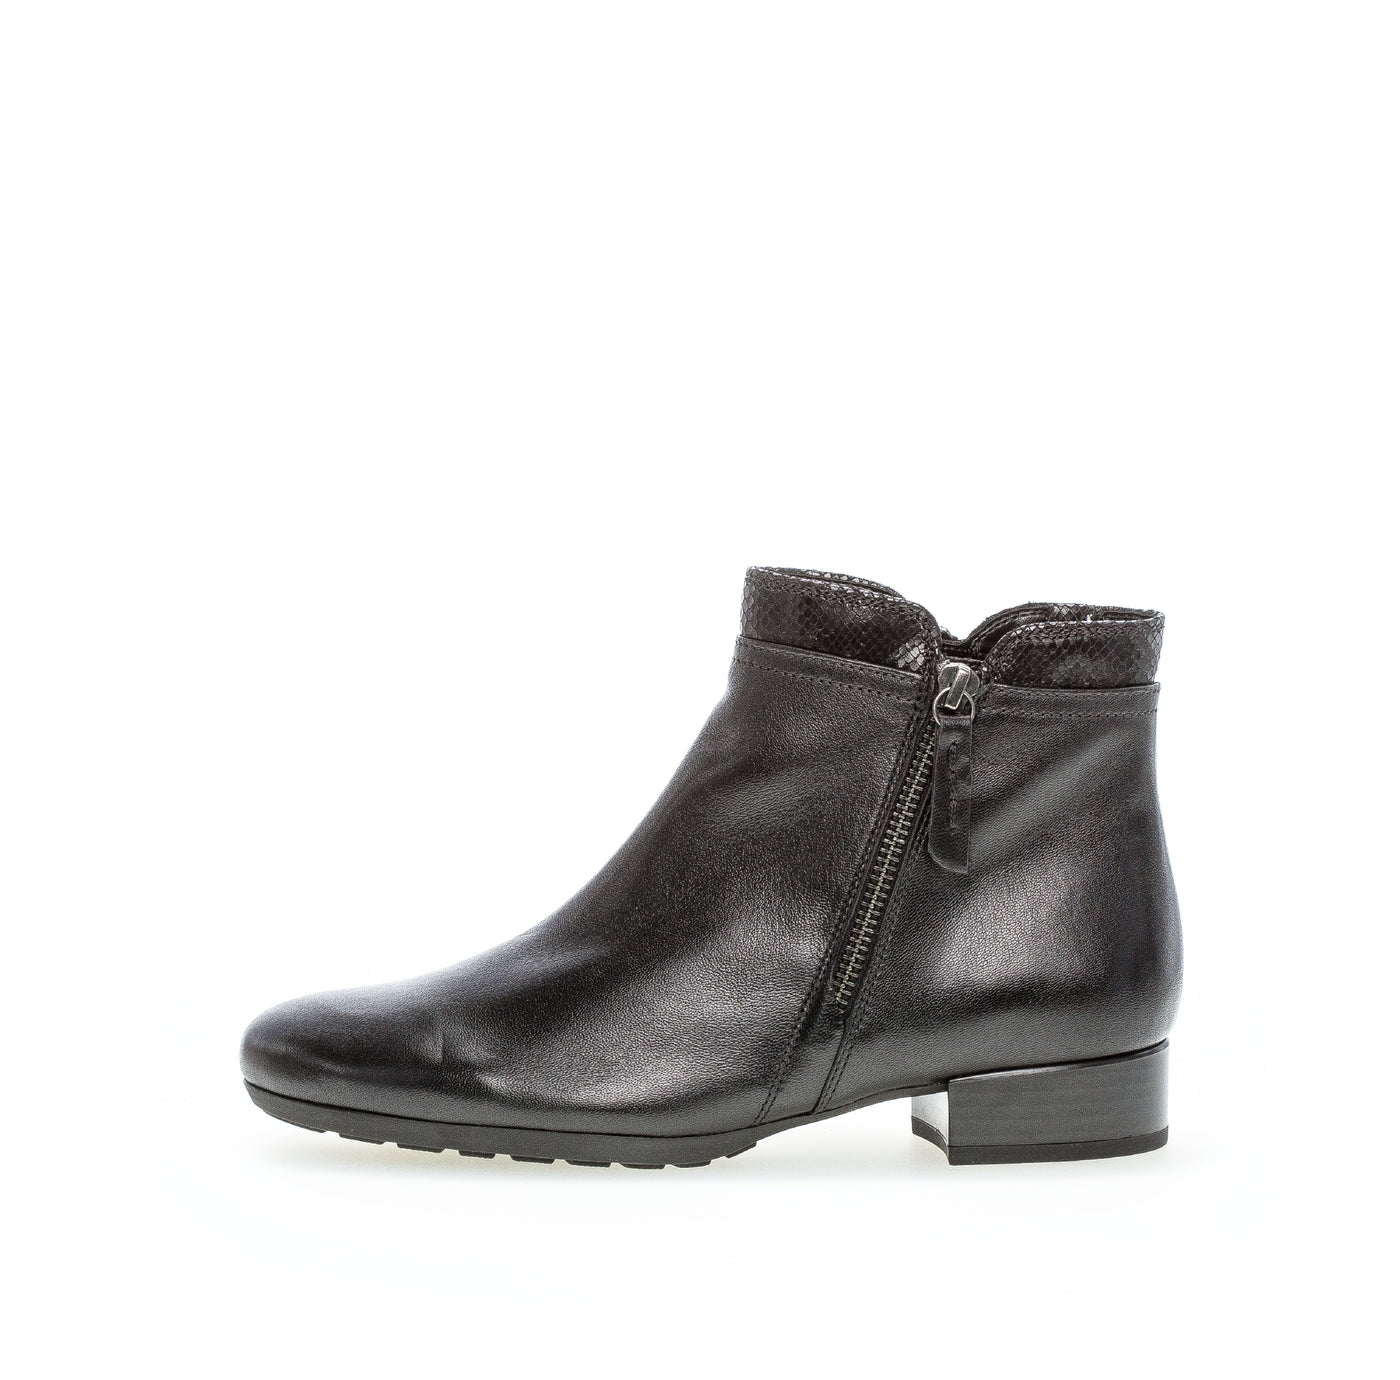 GABOR - 72.718.27 FLAT ANKLE BOOT - BLACK